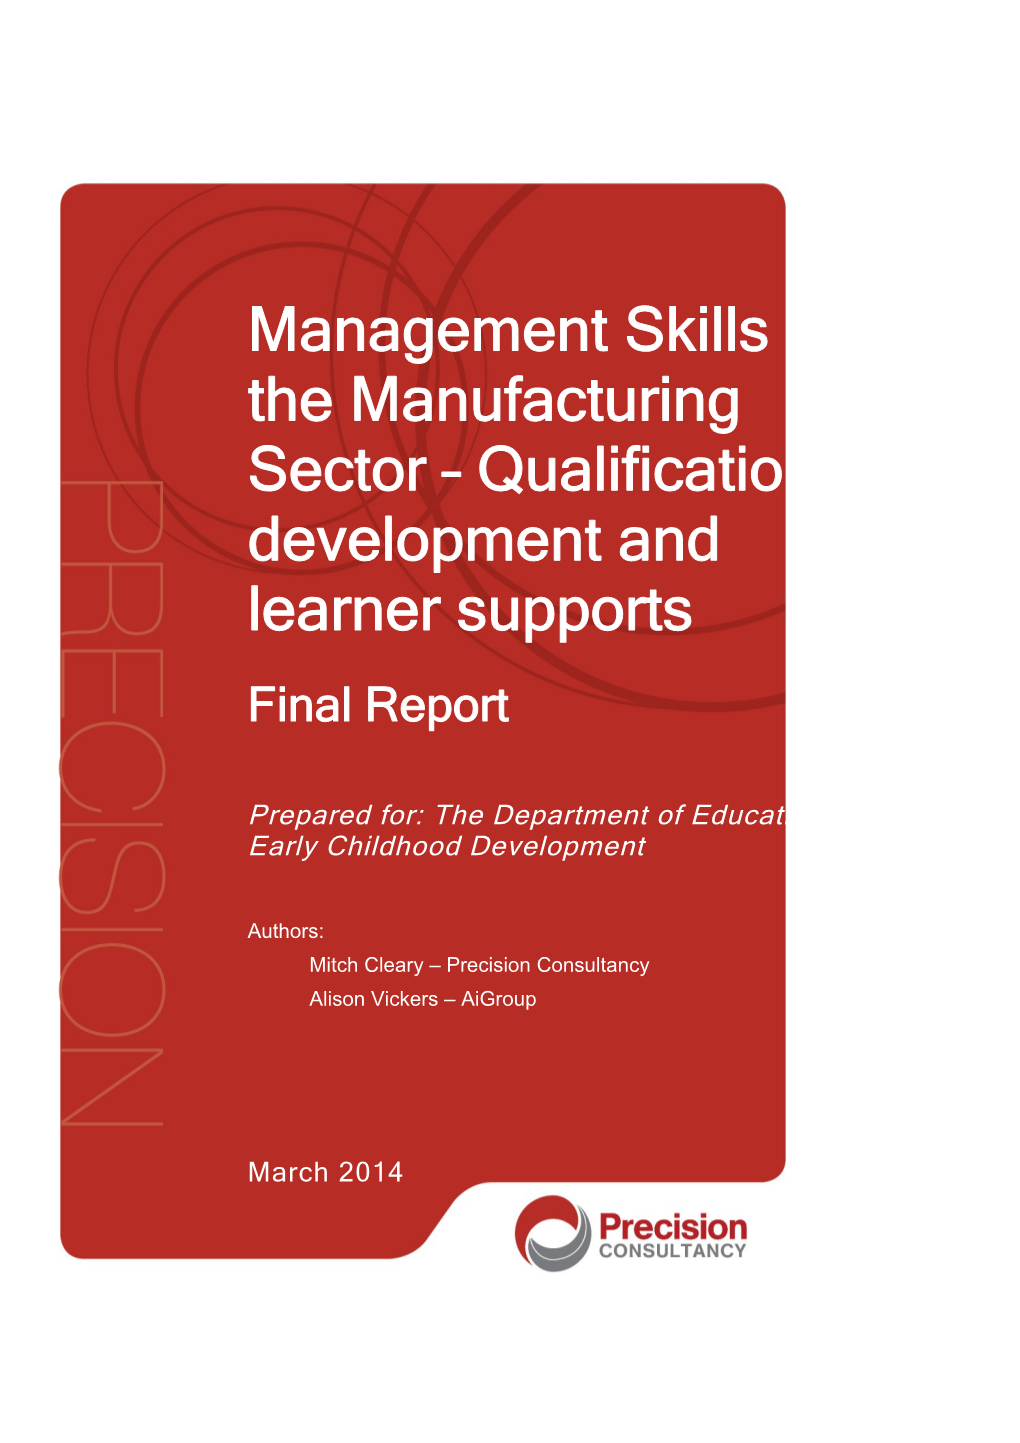 Management Skills in the Manufacturing Sector - Qualifications Development and Learner Supports